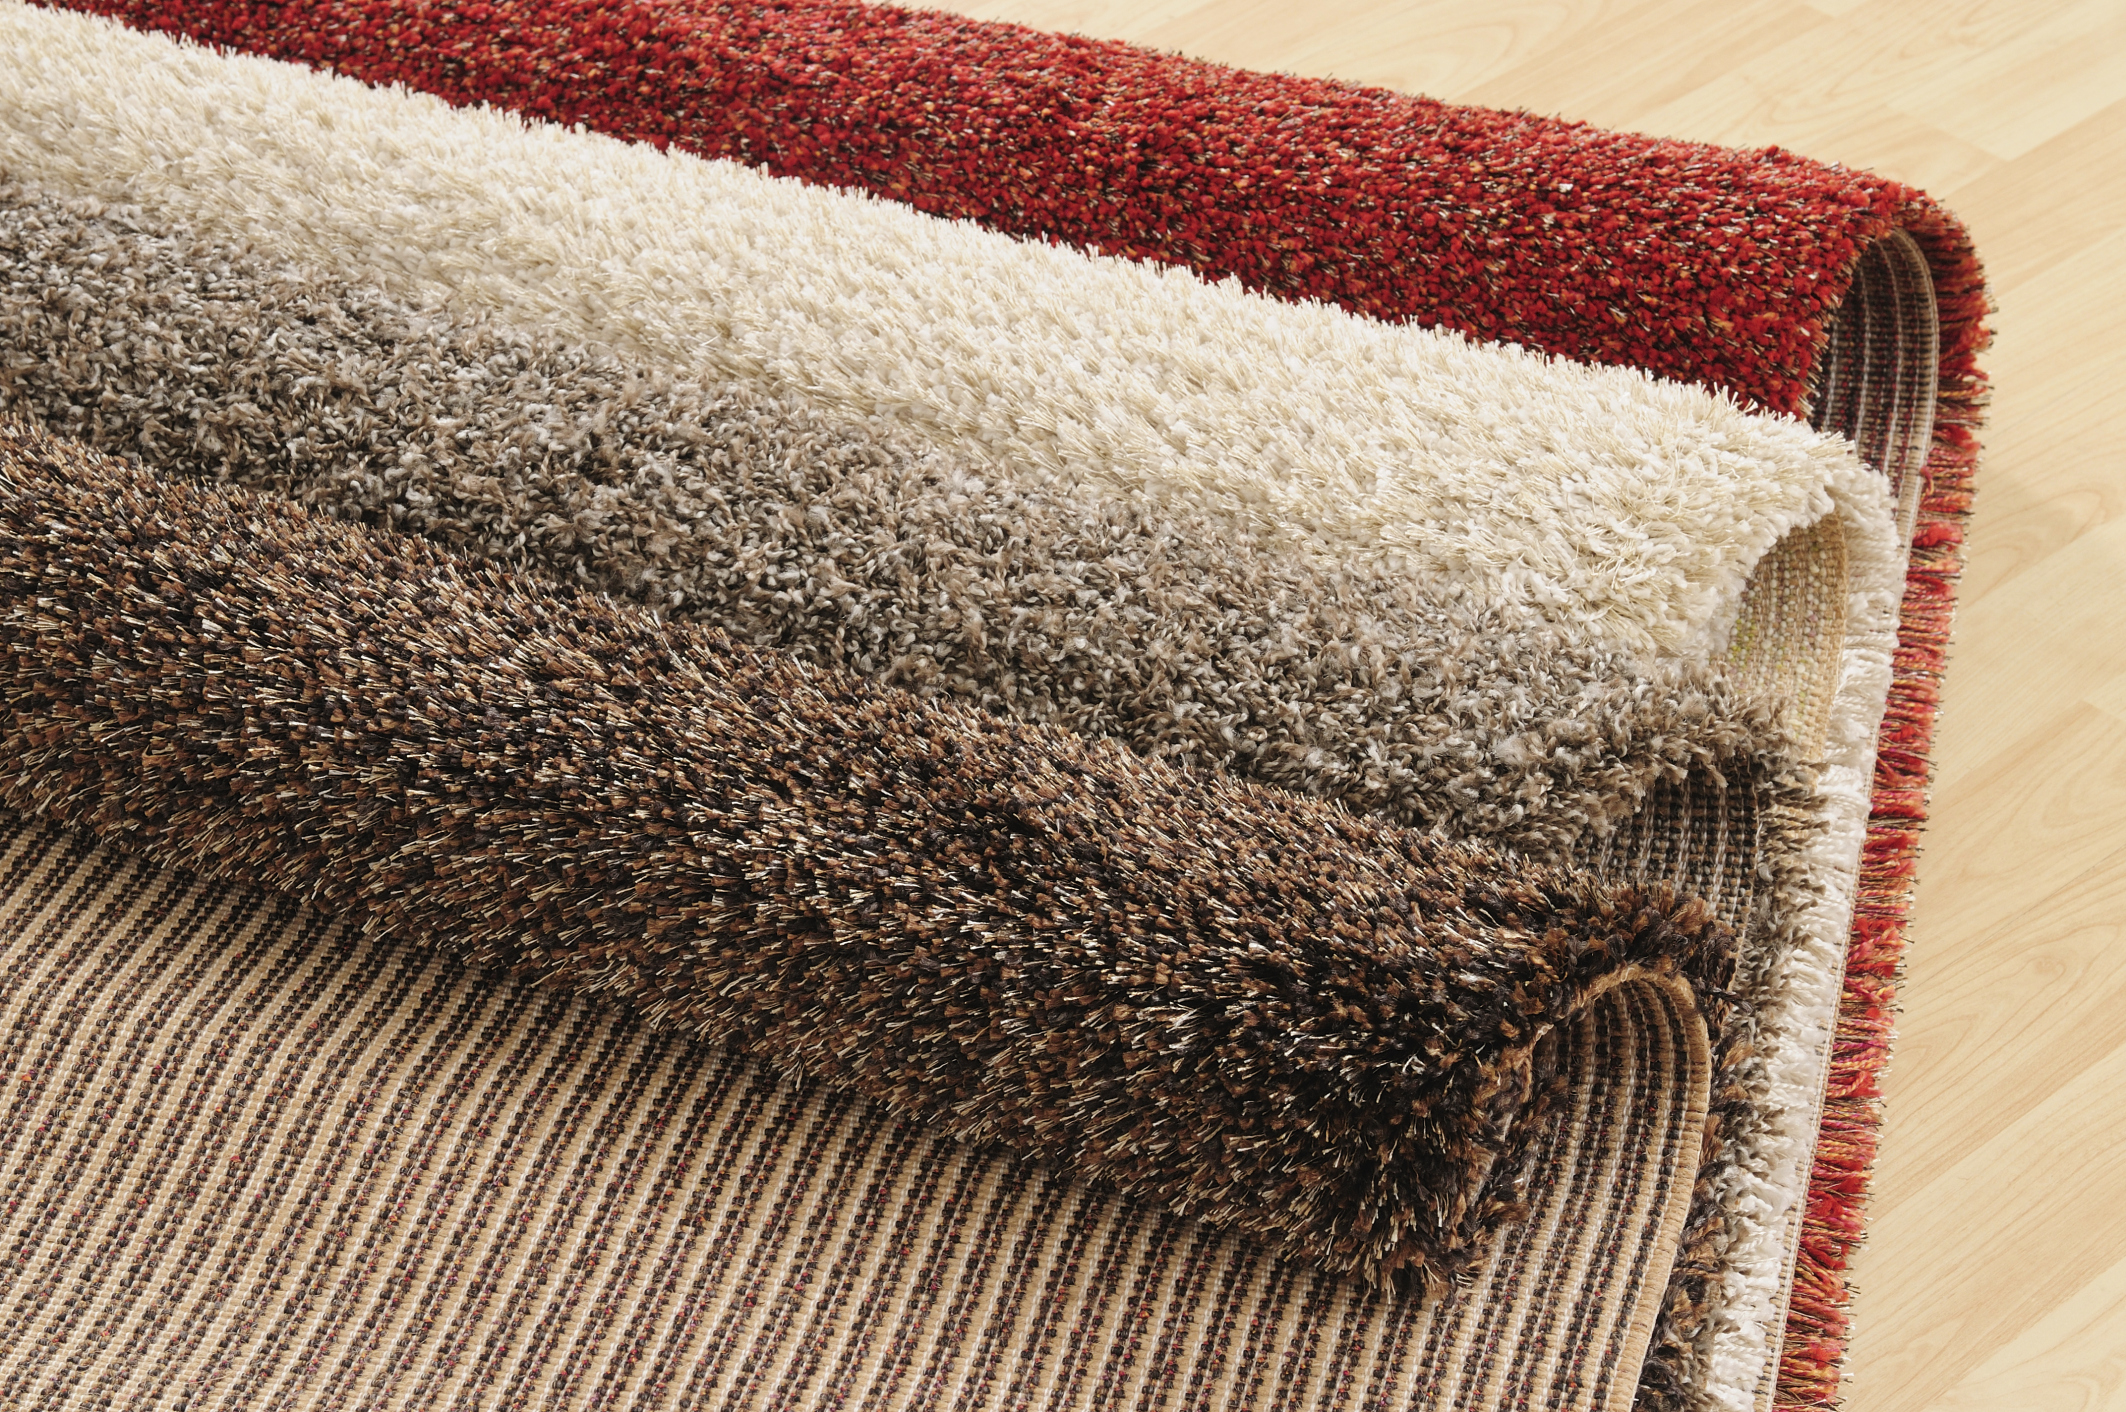 Why Choose Us As Your Carpet Supplier